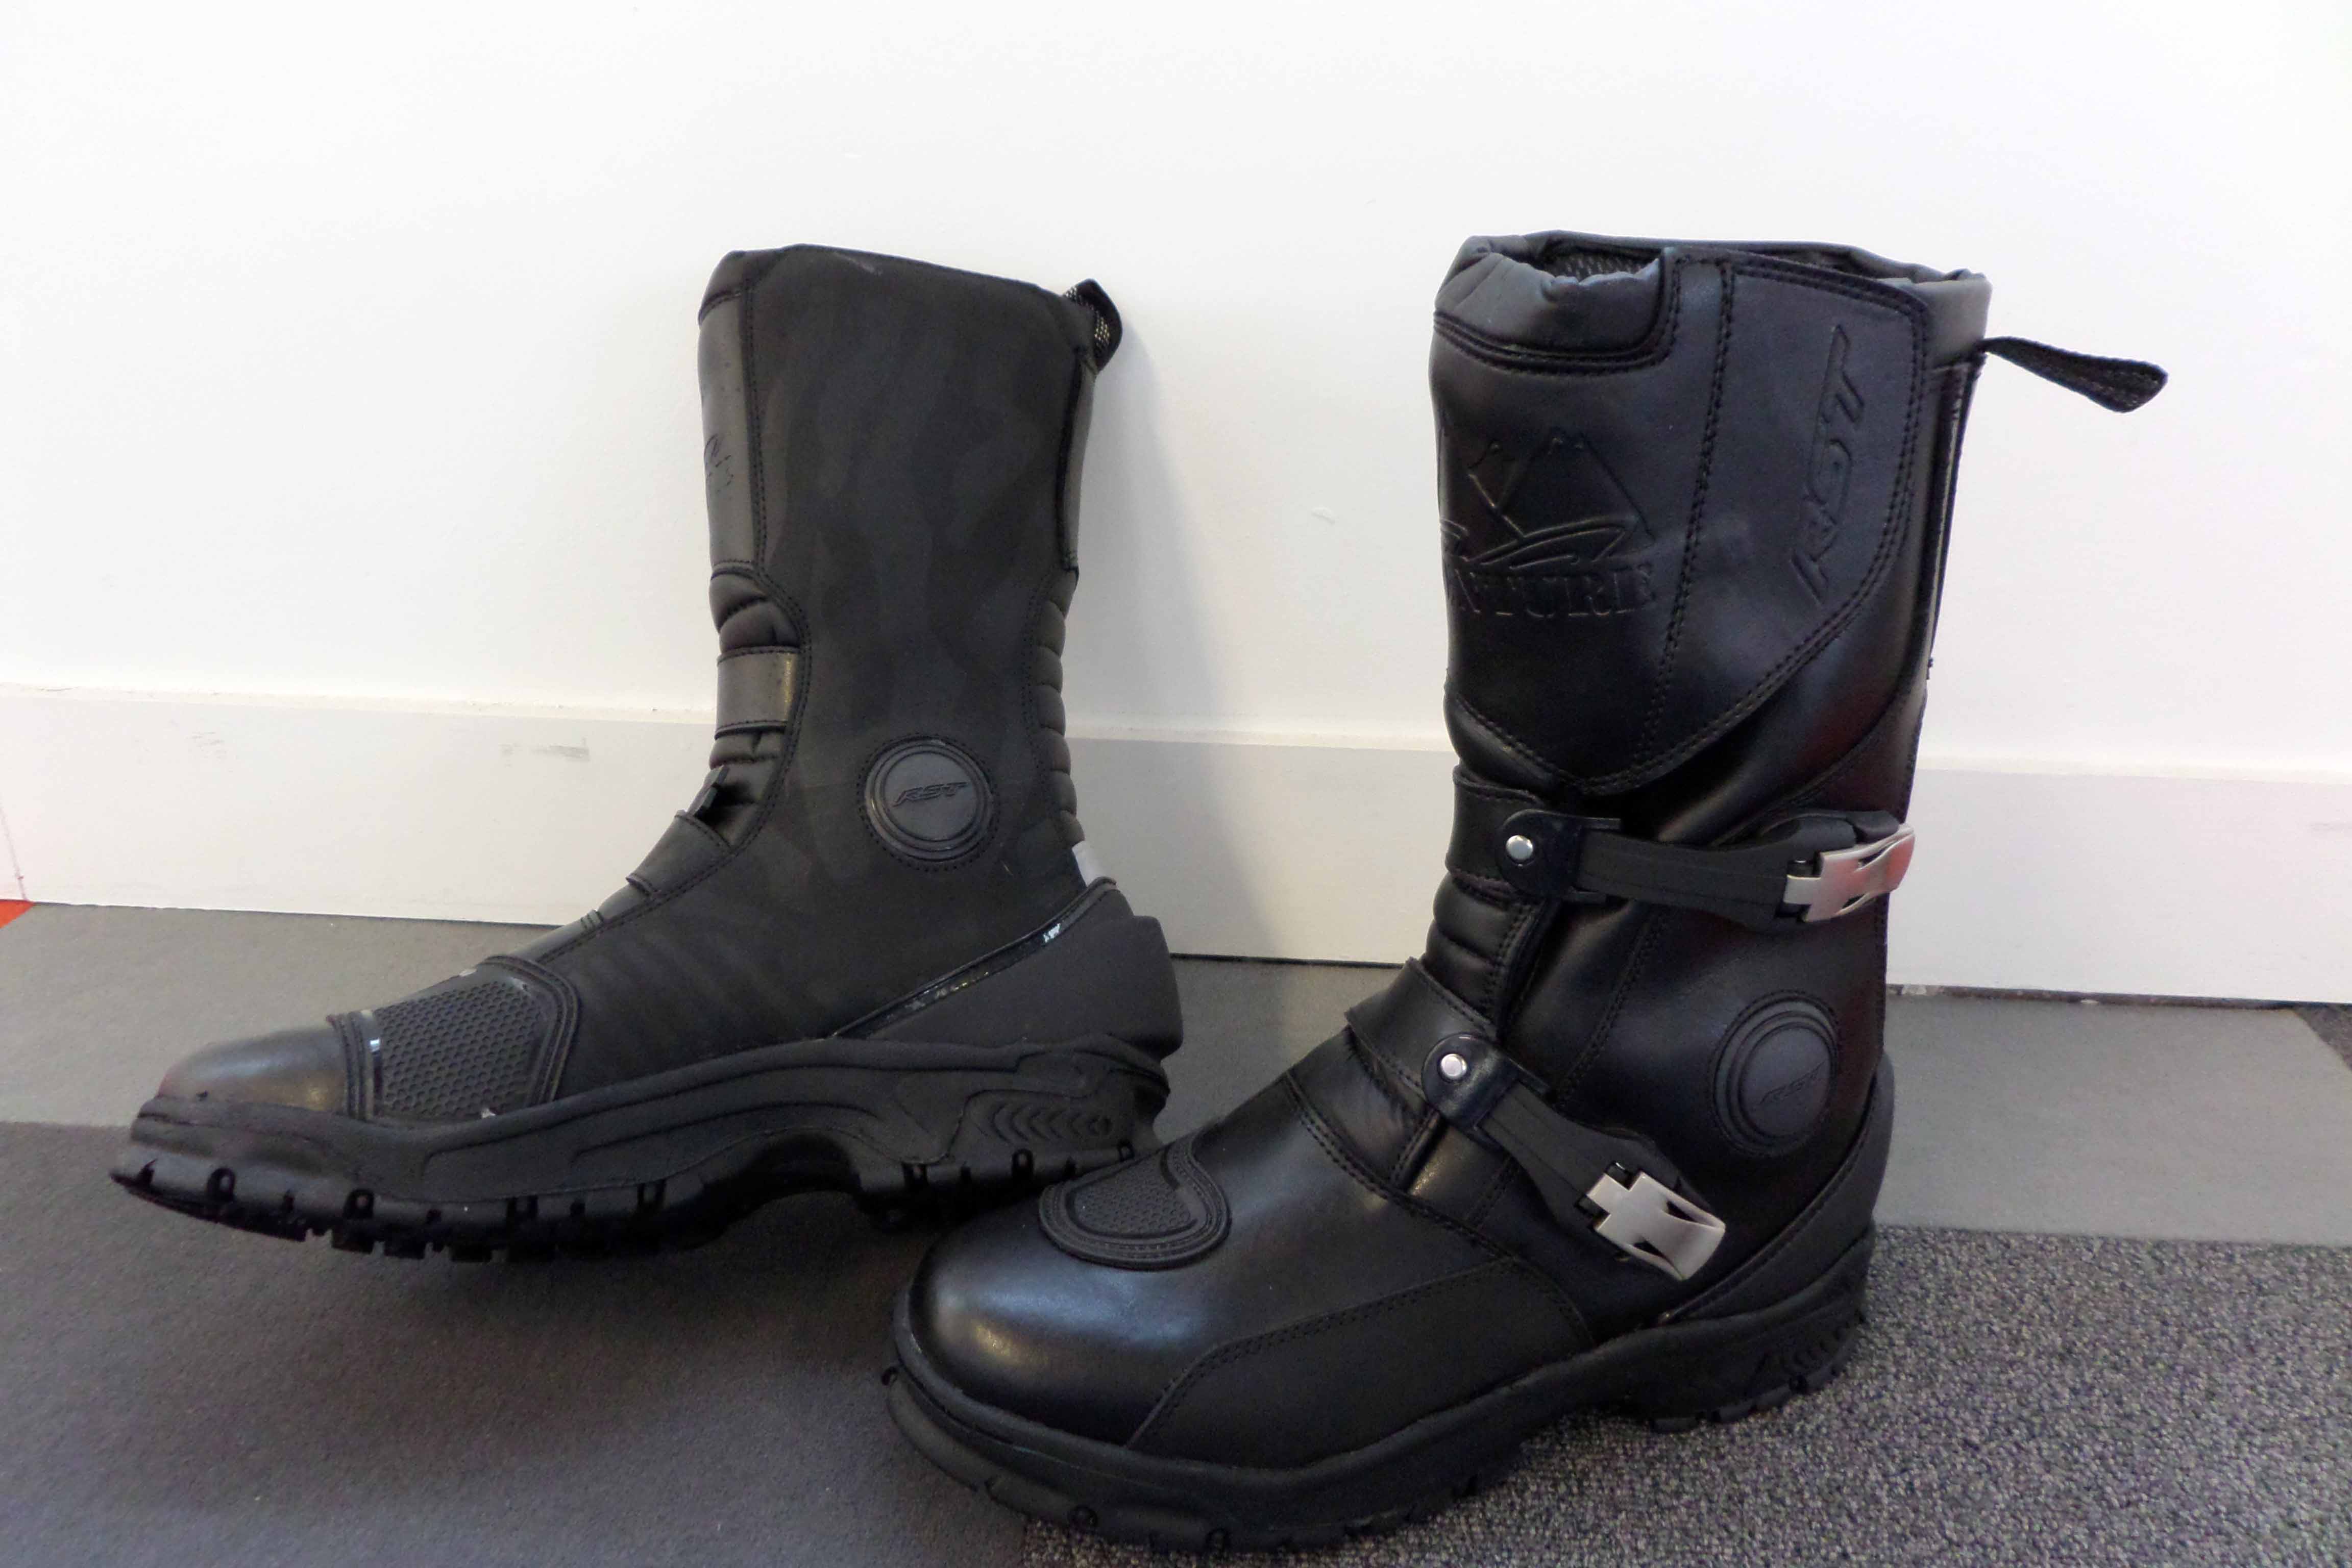 Tested: Sub-£100 waterproof motorcycle boots